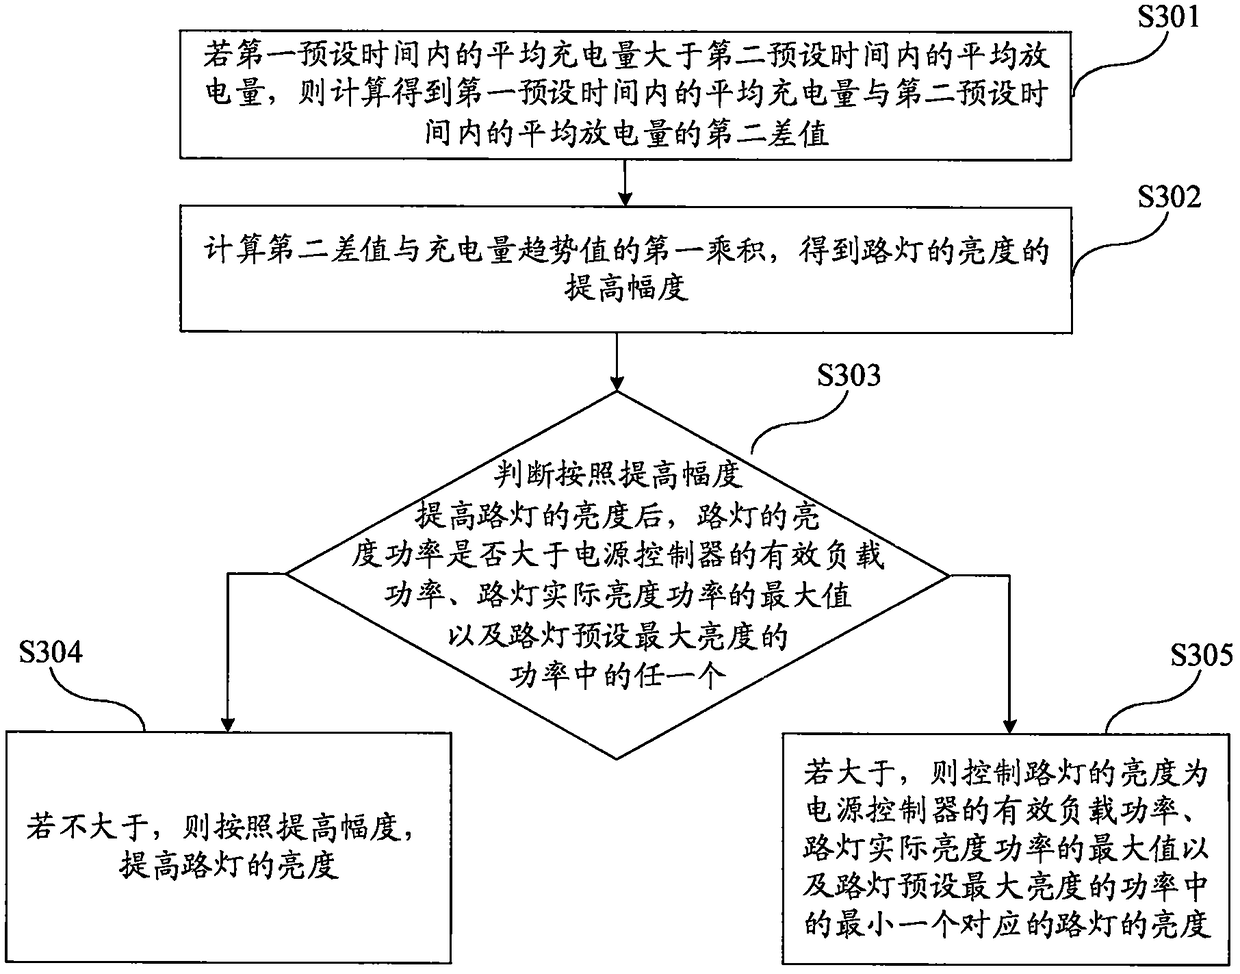 Brightness control method and system for street lamp